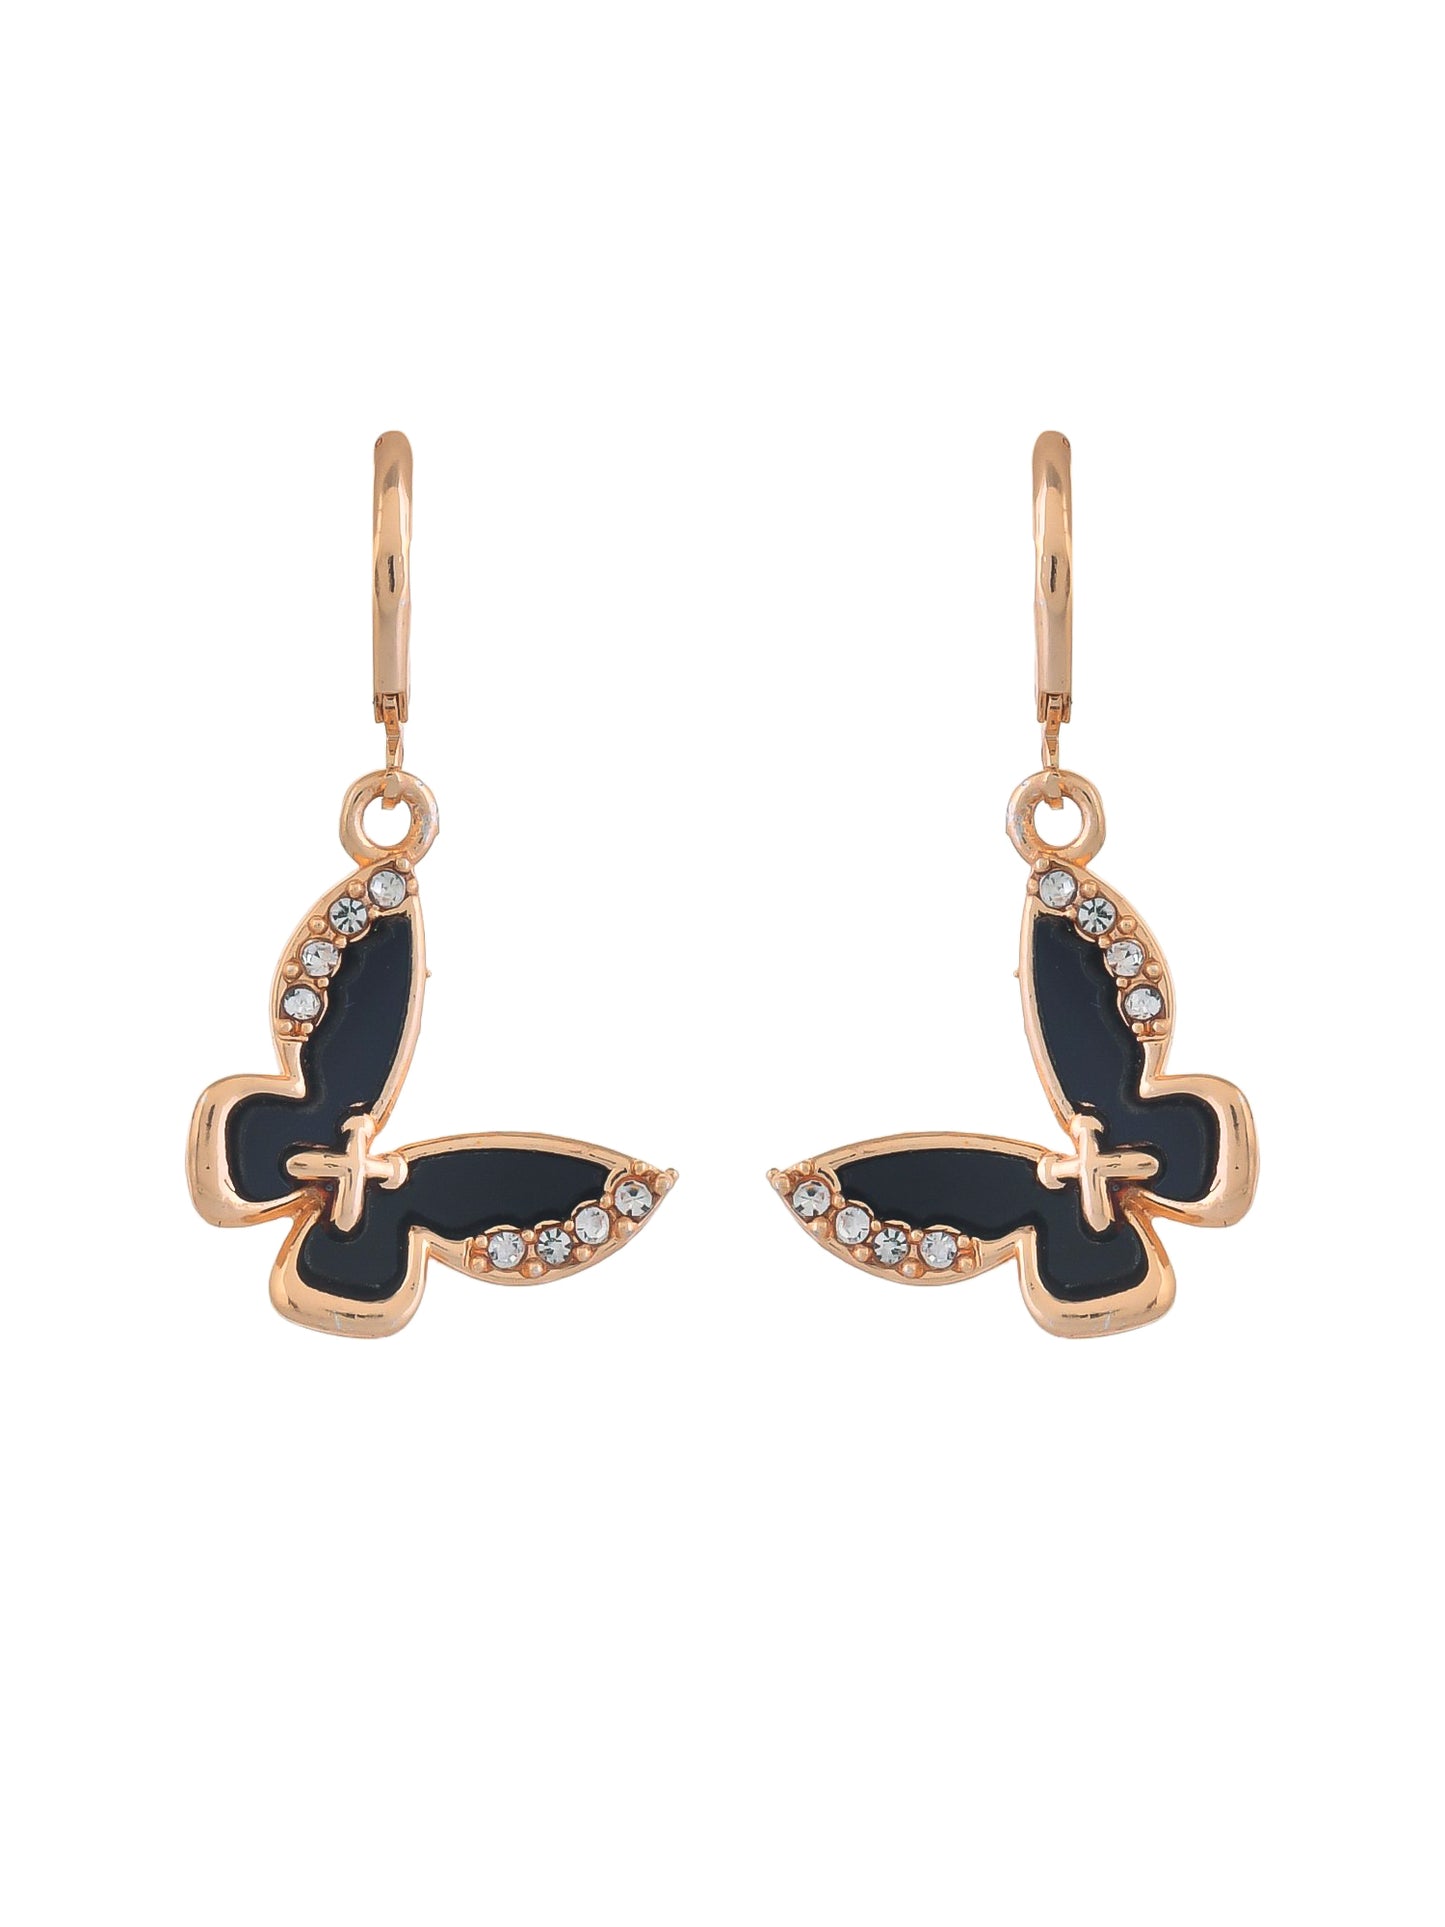 CZ Rose Gold Black Butterfly Drop Earrings for Women and Girls